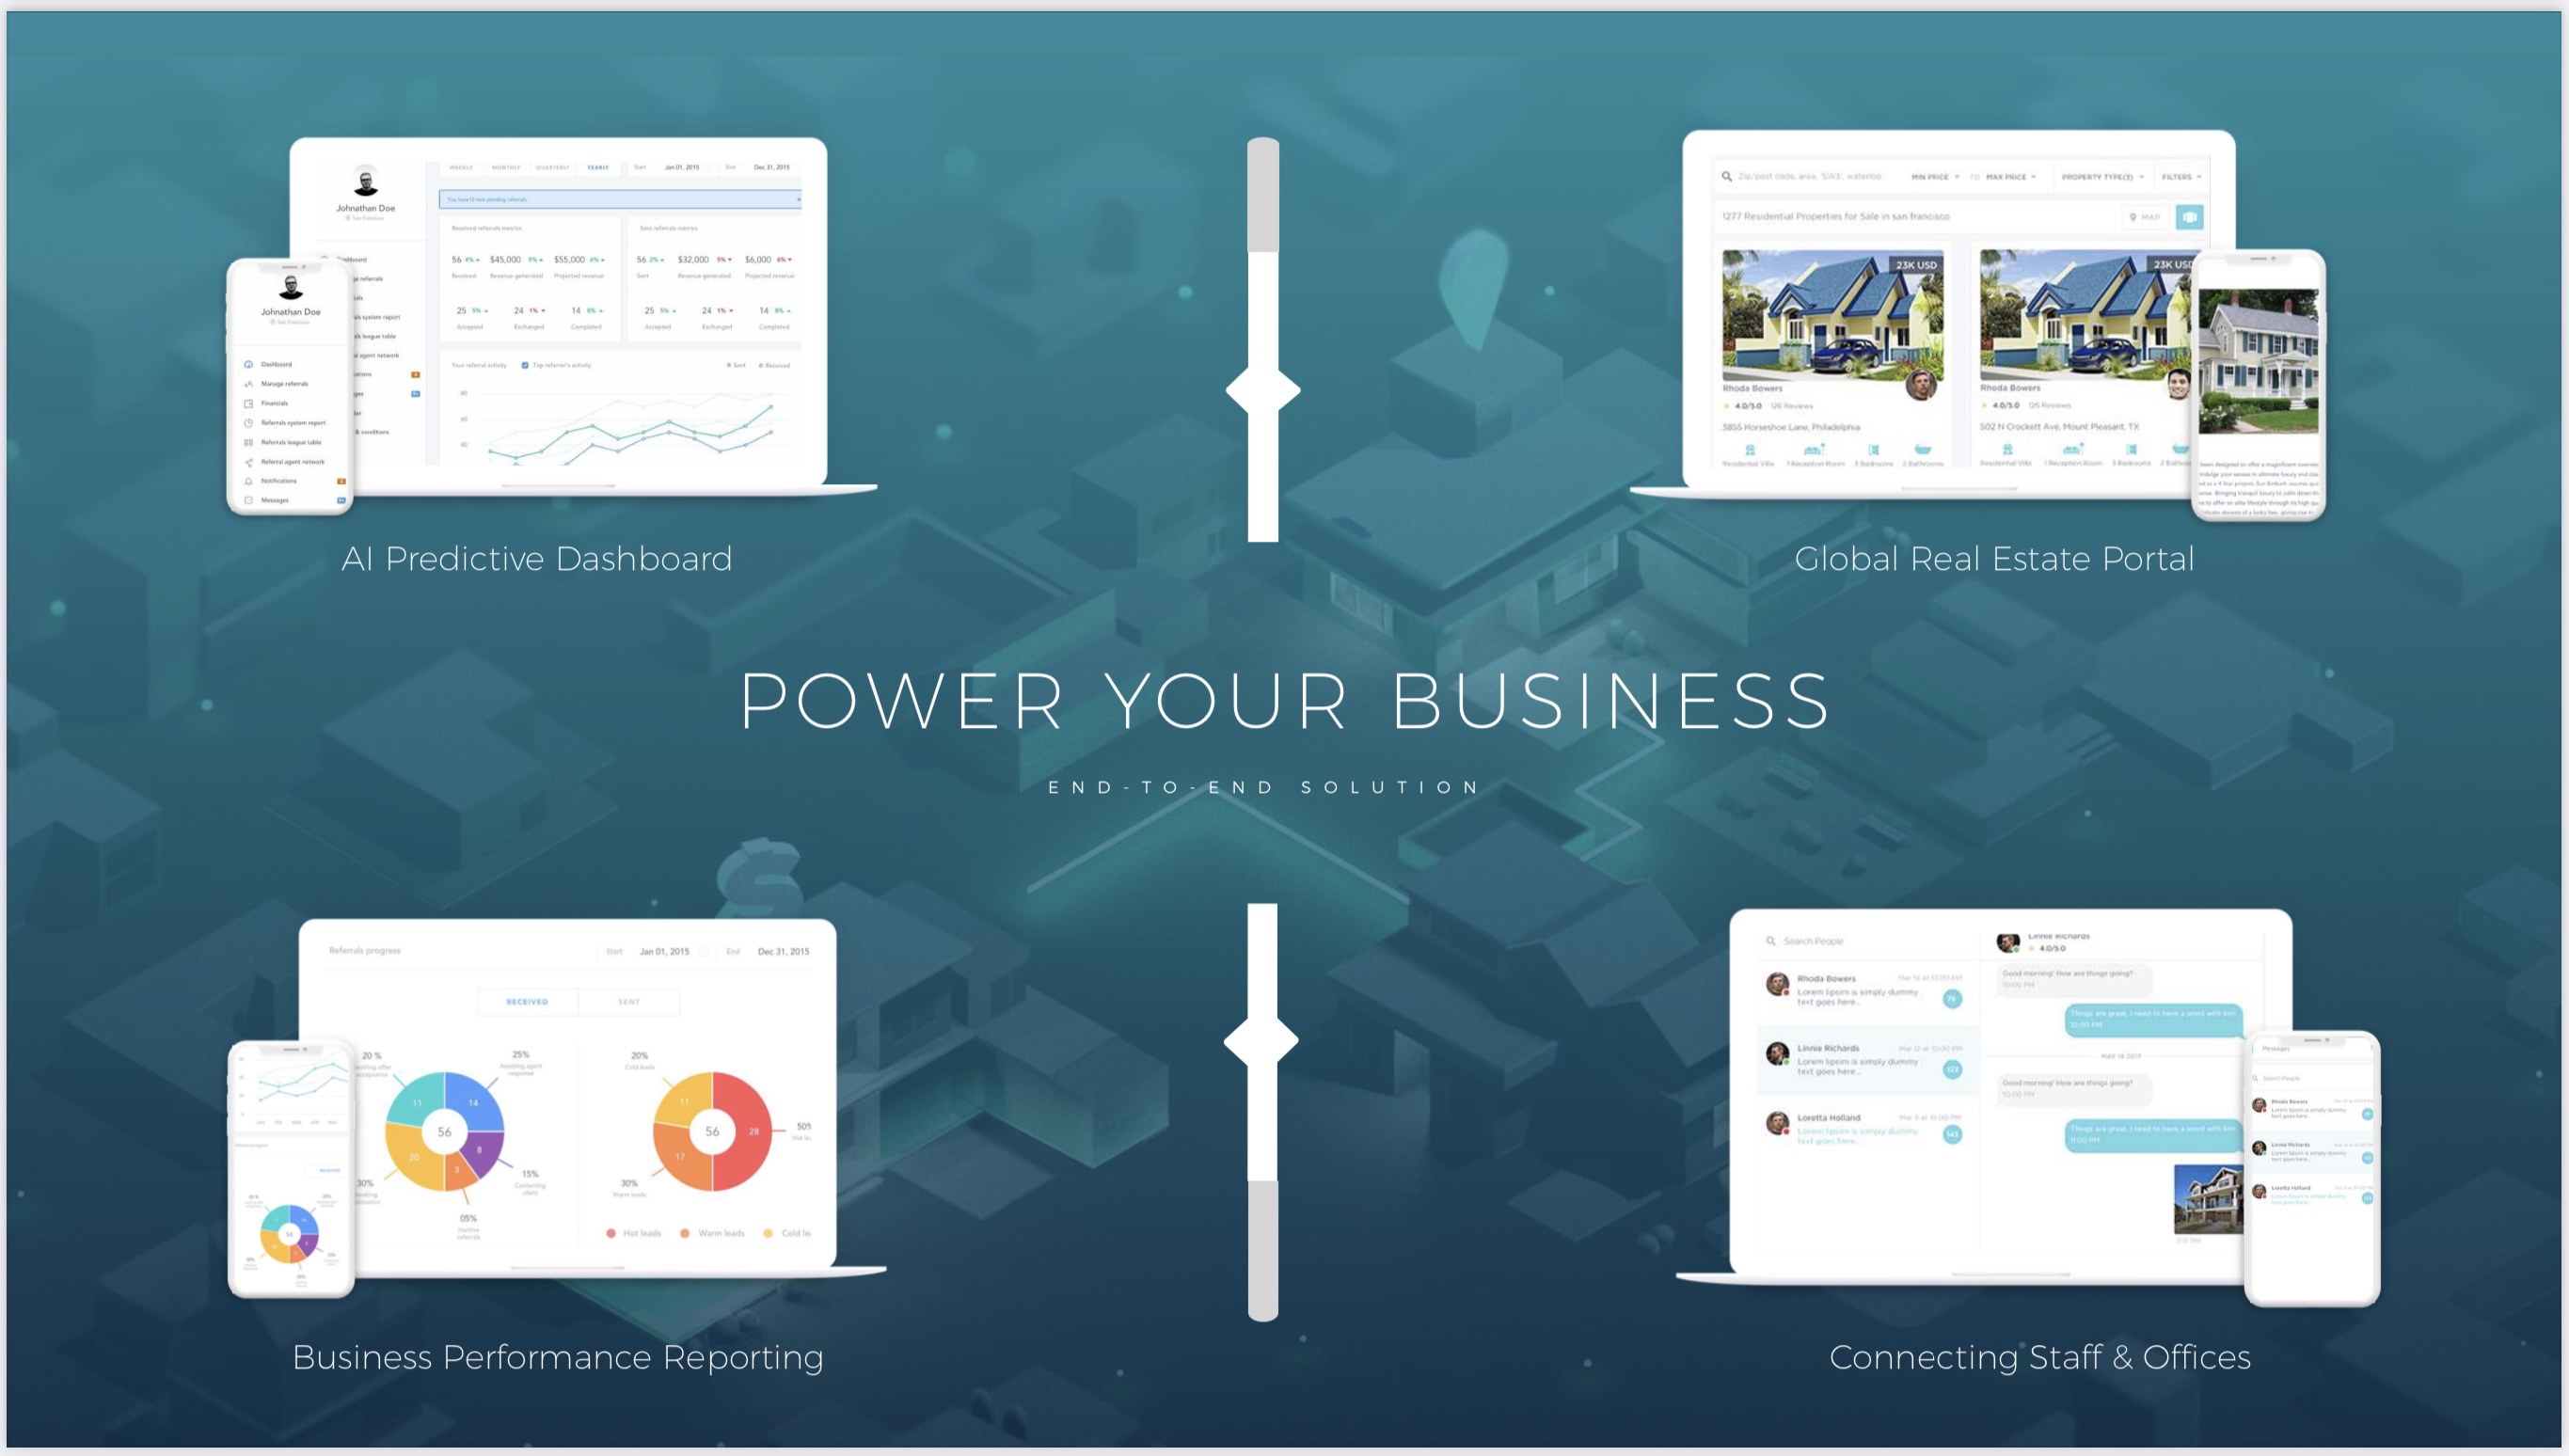 Power your Business